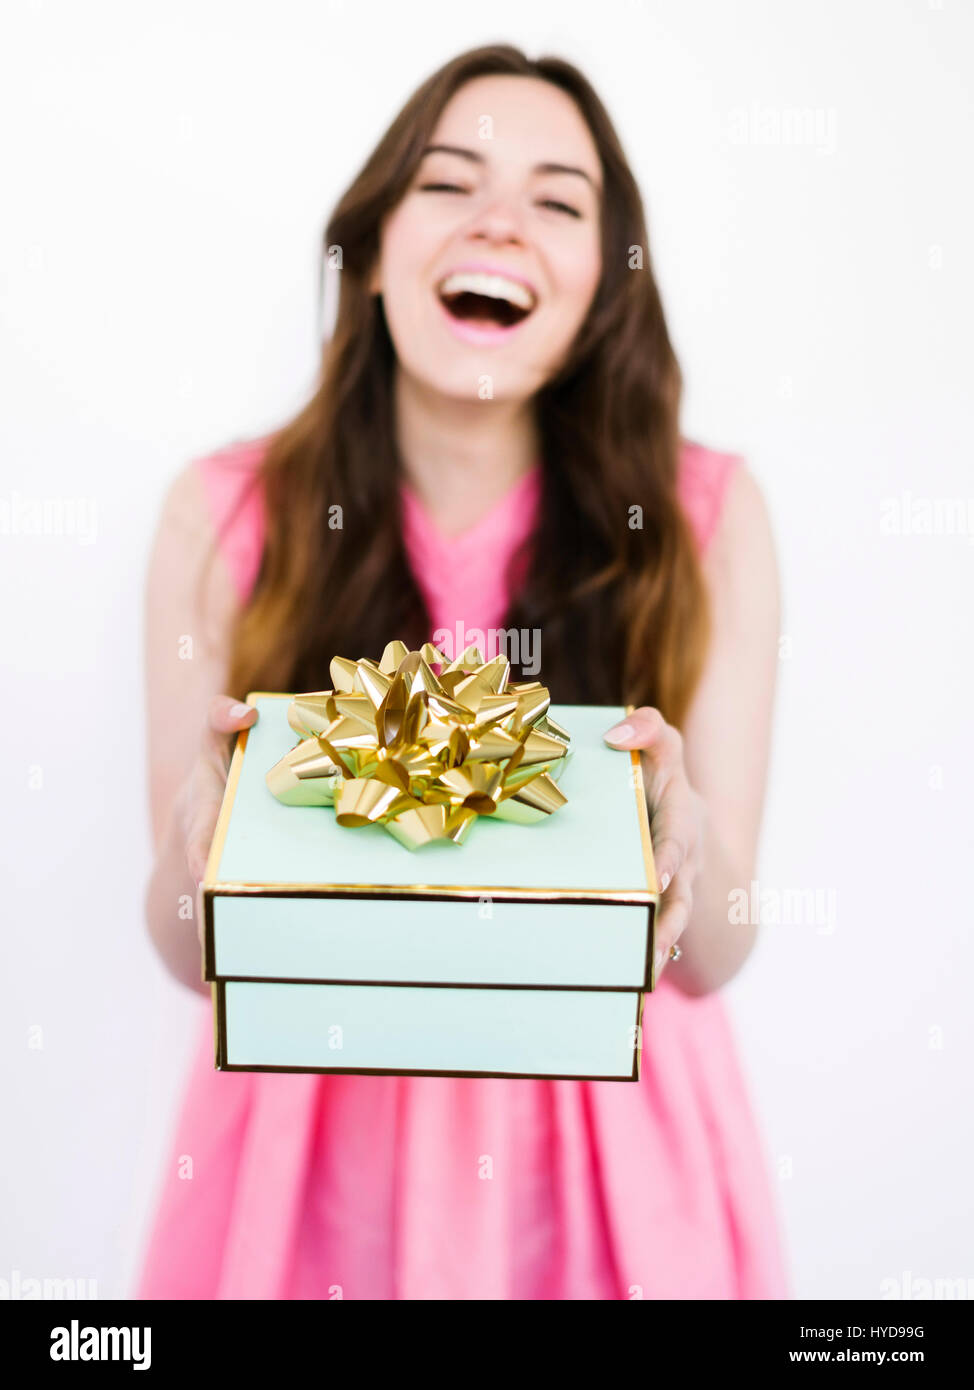 Mid adult woman holding gift box and laughing Stock Photo